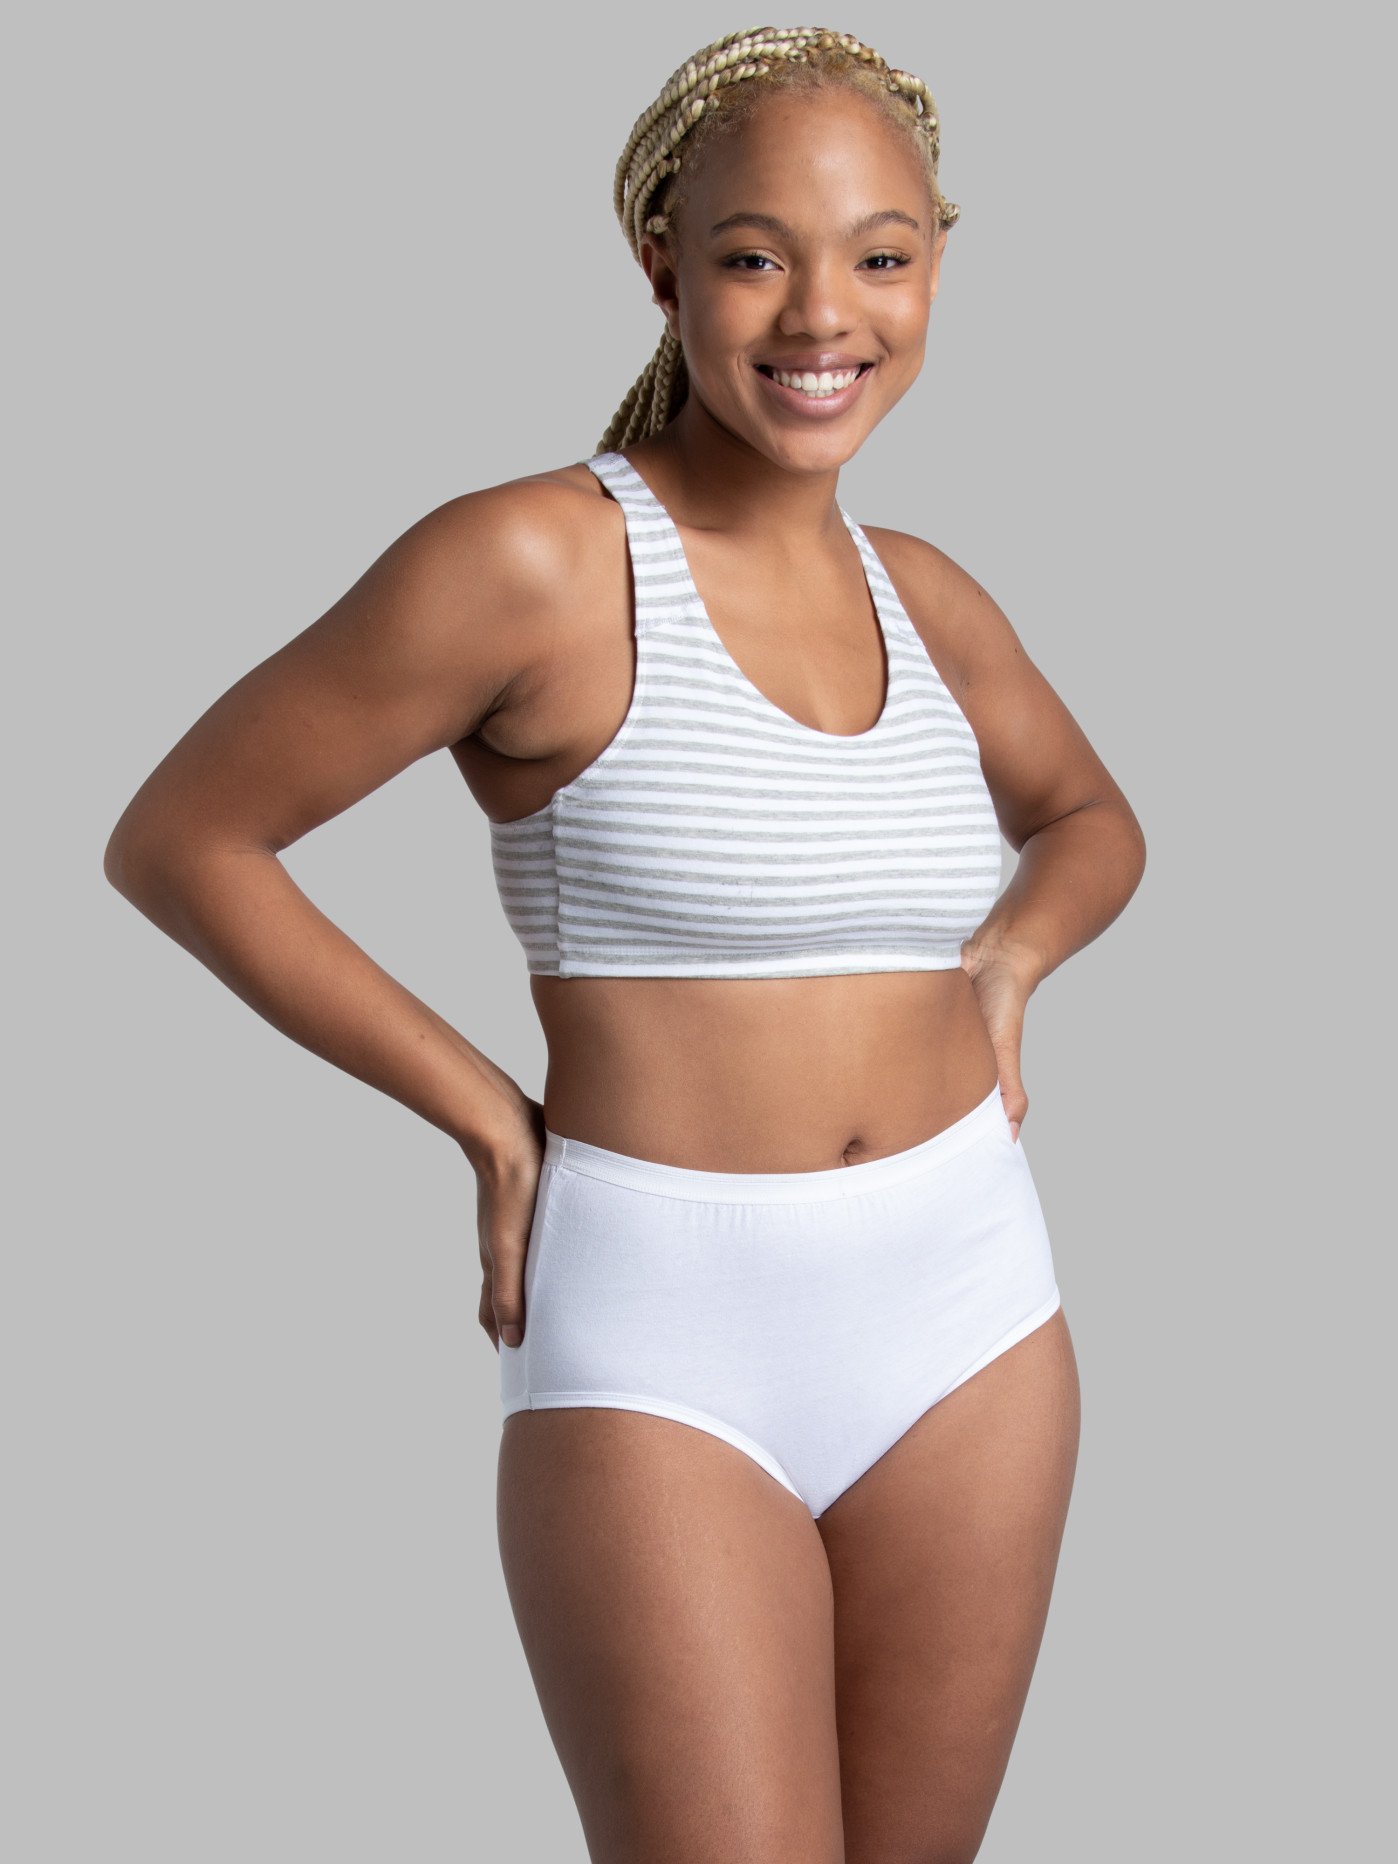 Fruit of the Loom Women's 6 Pack Cotton Brief Panties : :  Clothing, Shoes & Accessories